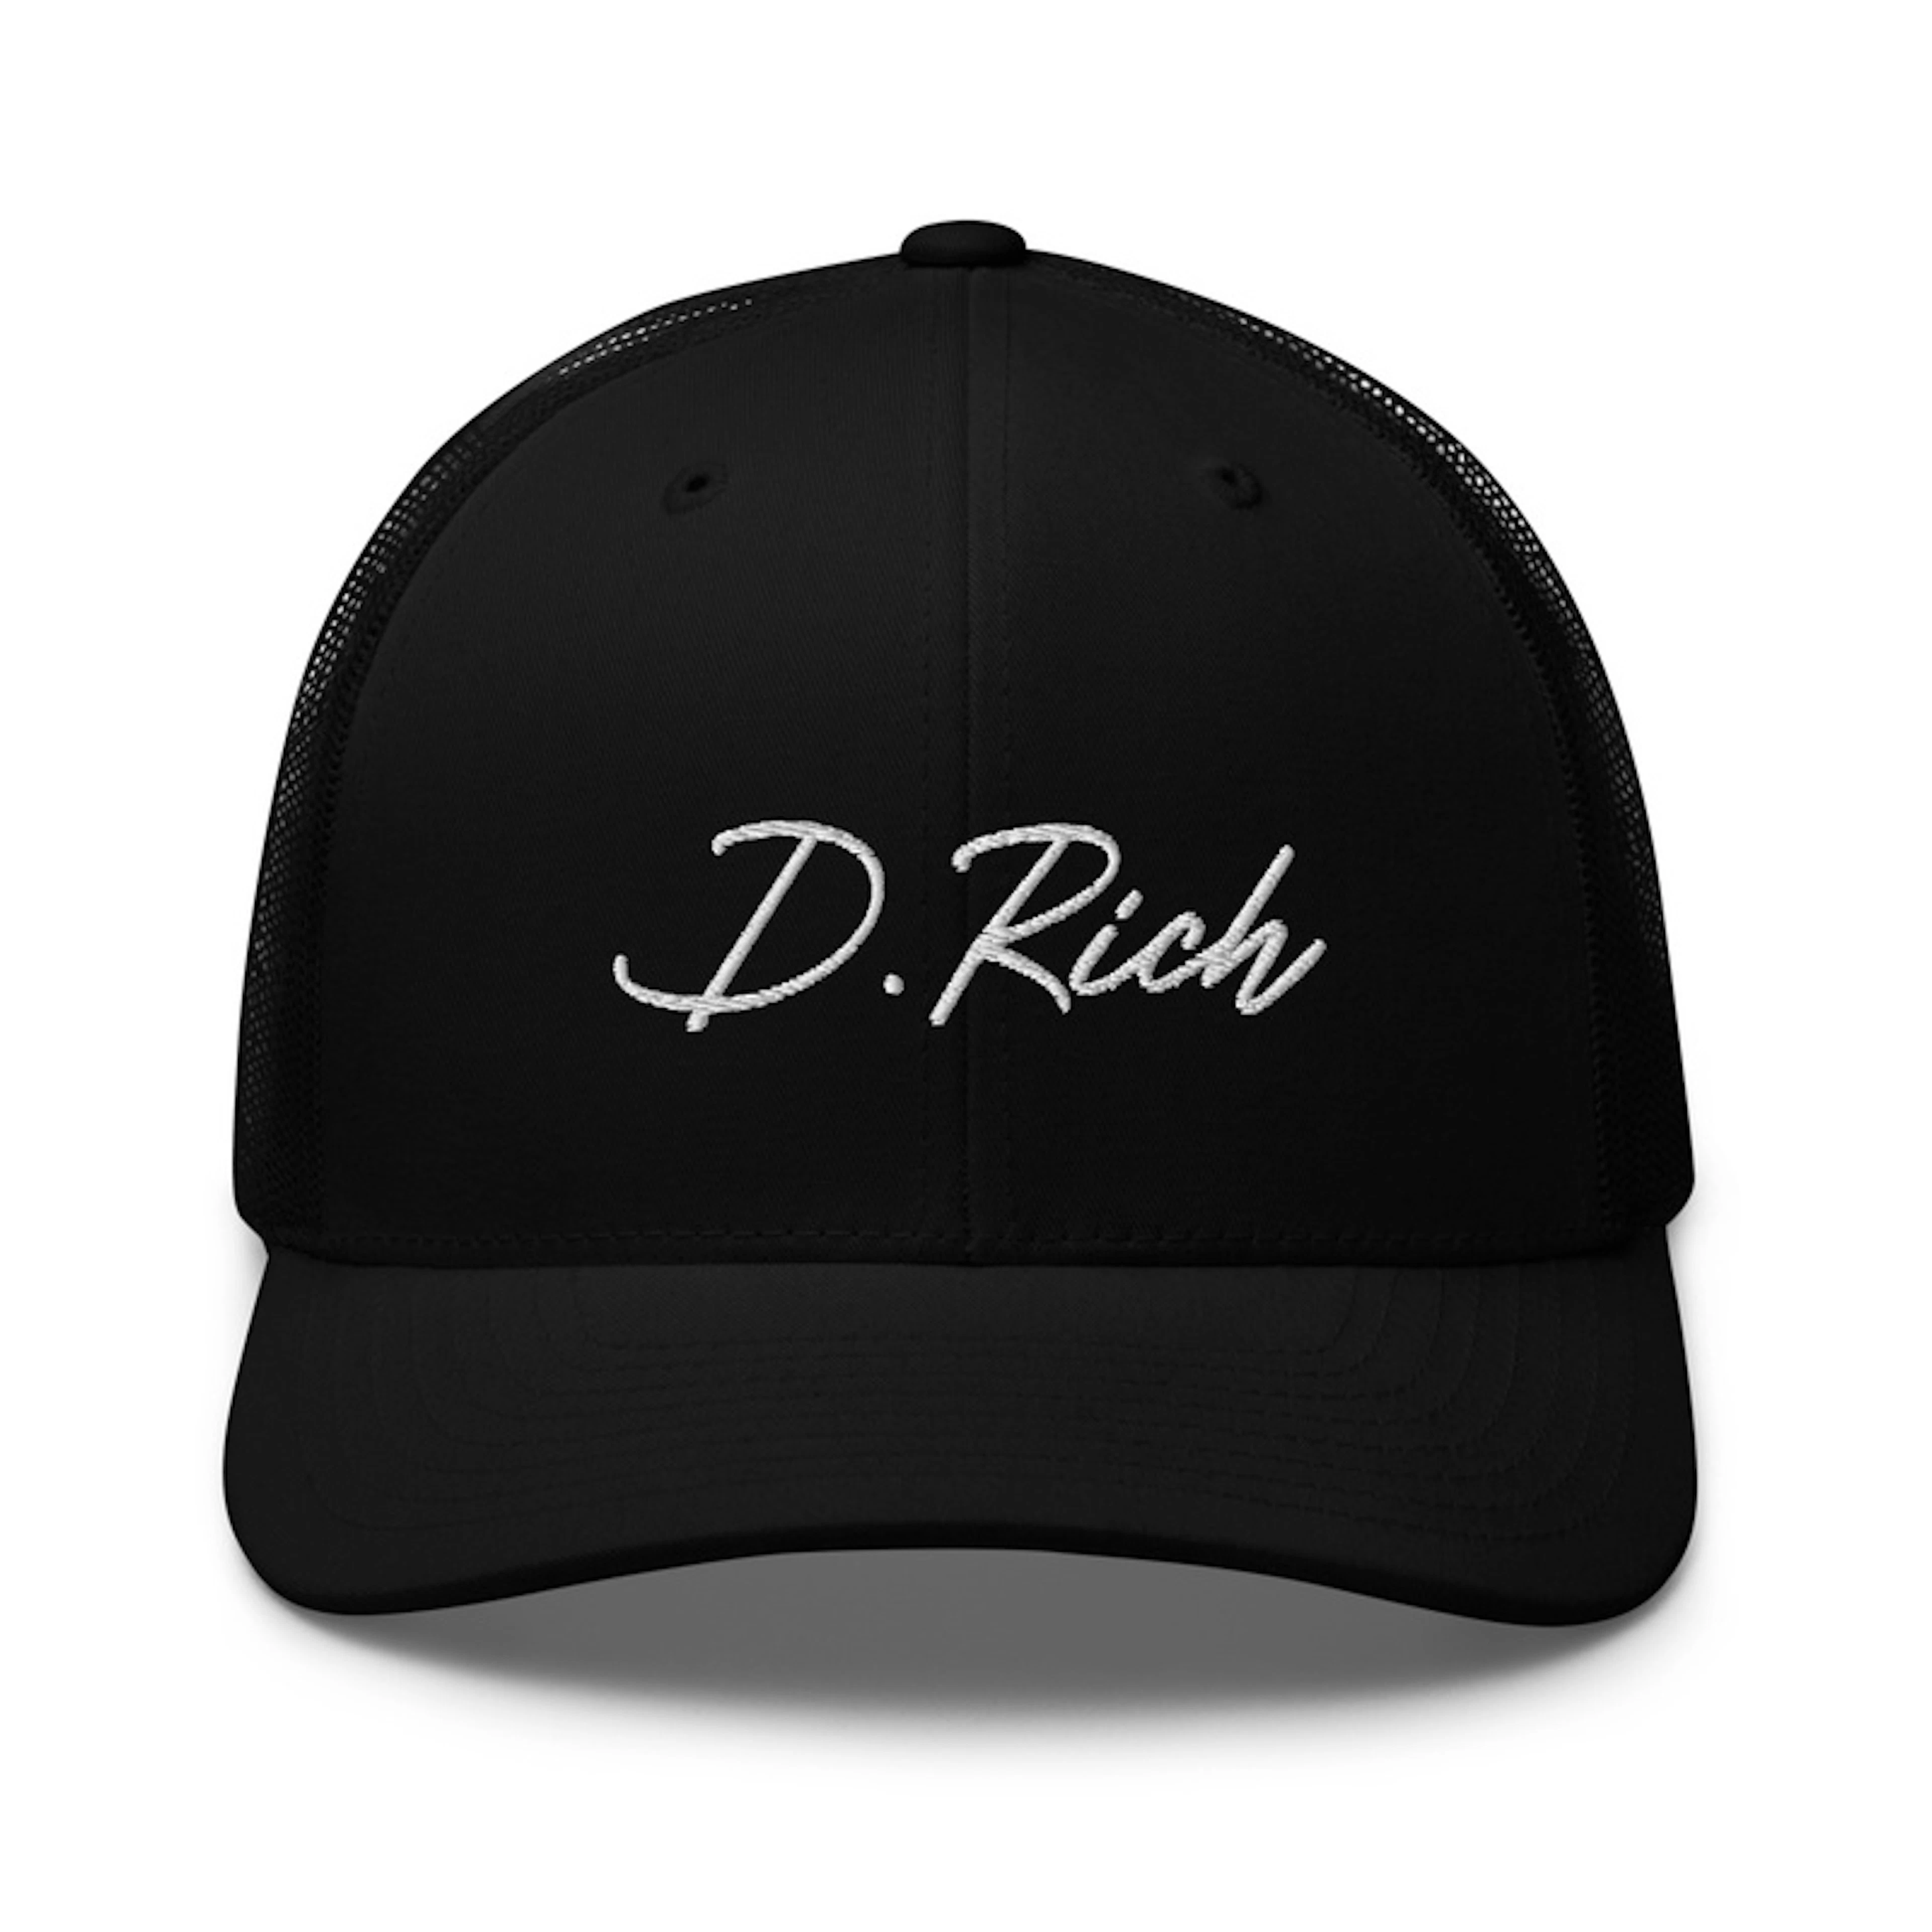 D. Rich logo embroidered hat